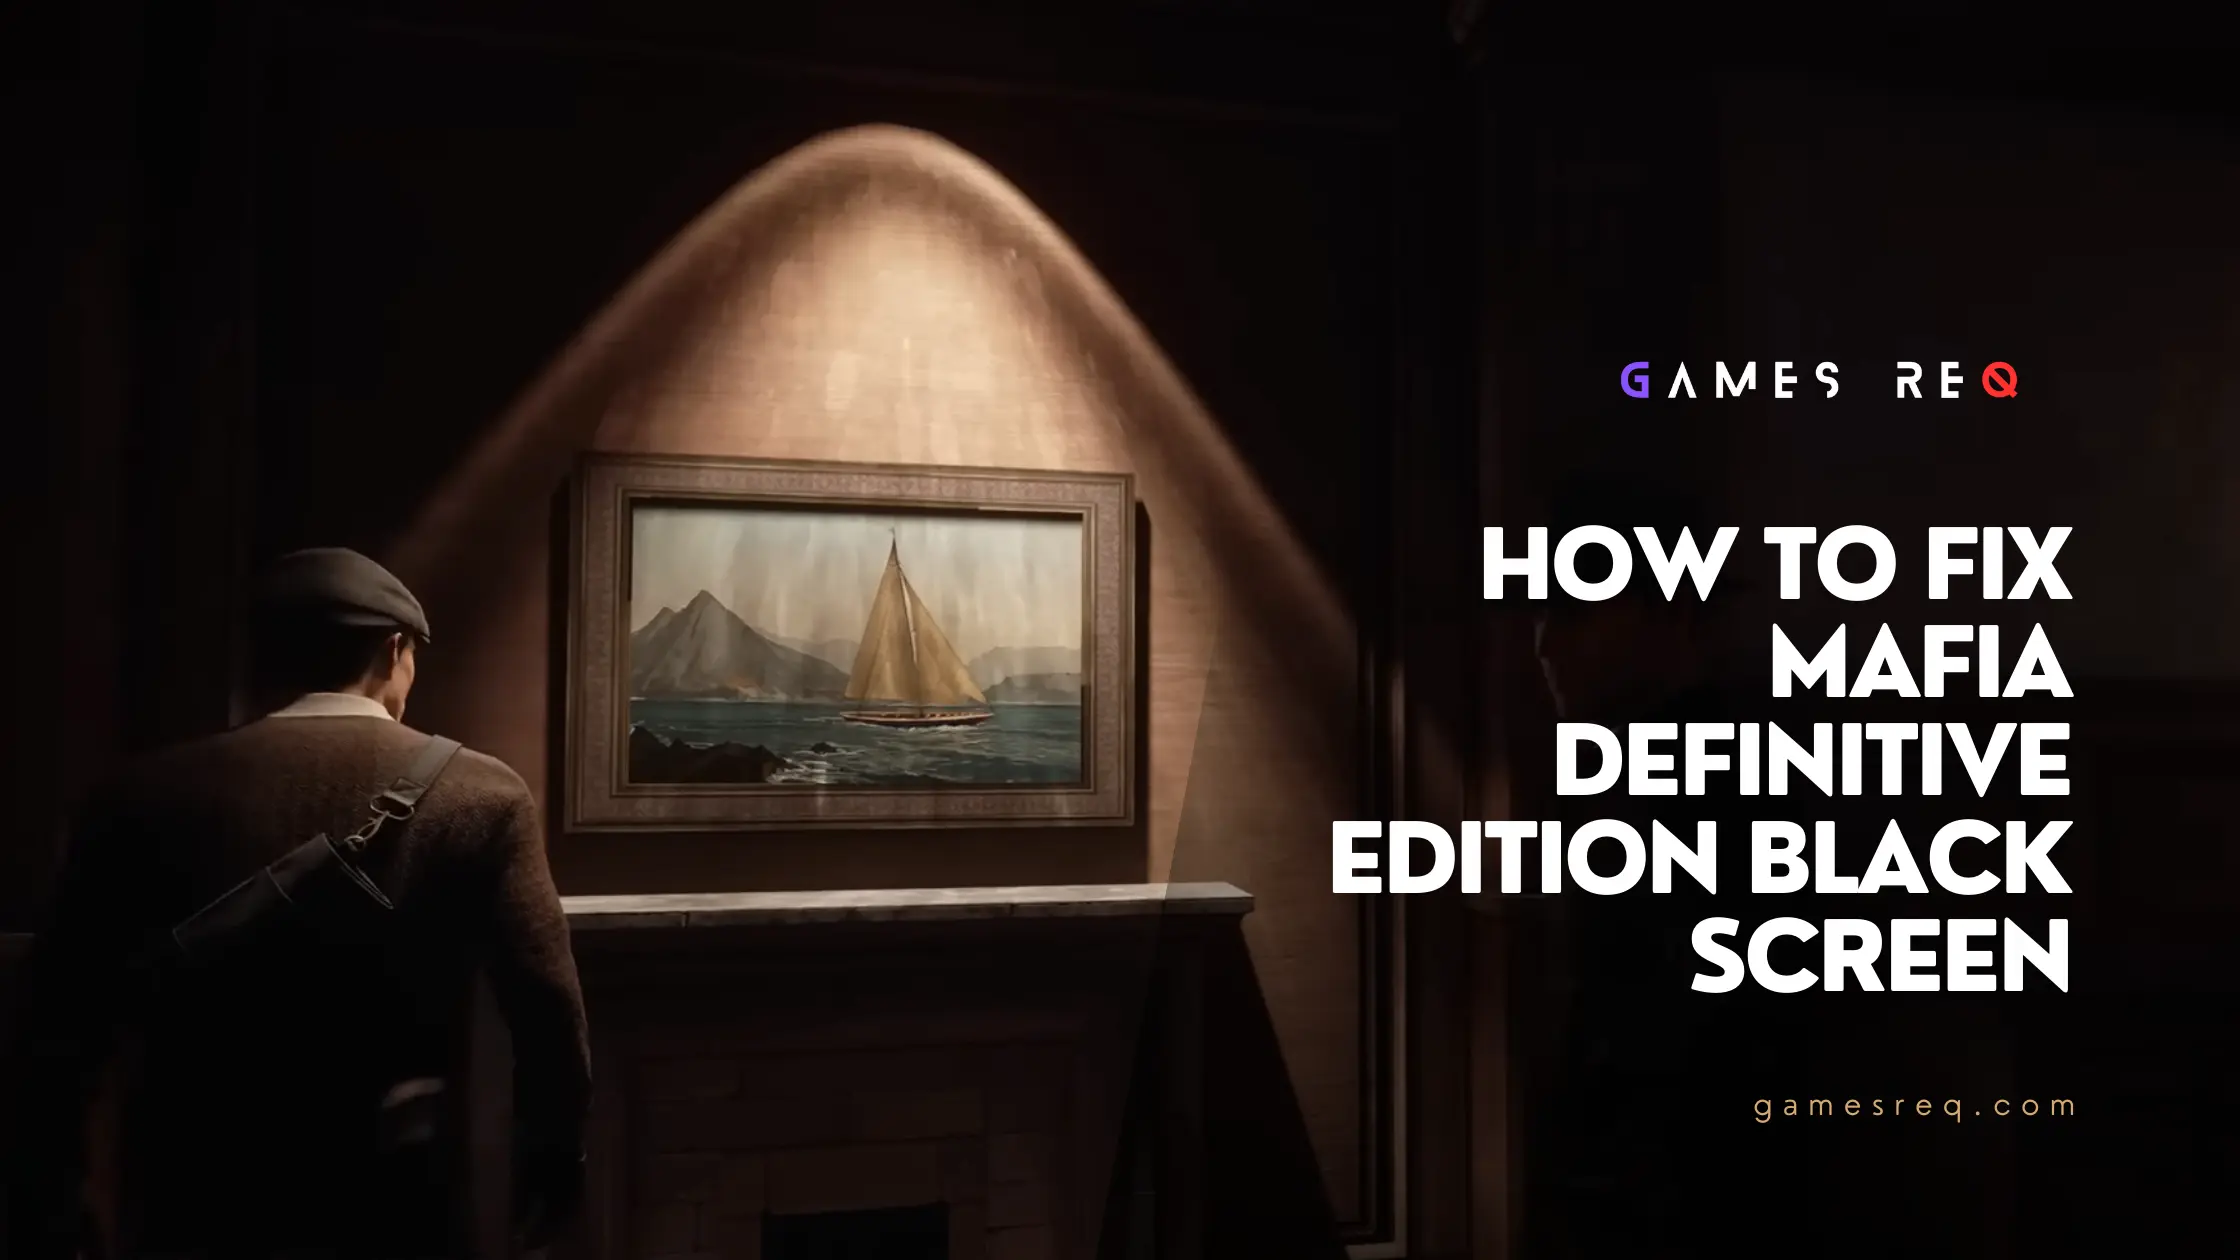 How to Fix Mafia Definitive Edition Black Screen and Lagging Issues on PS4